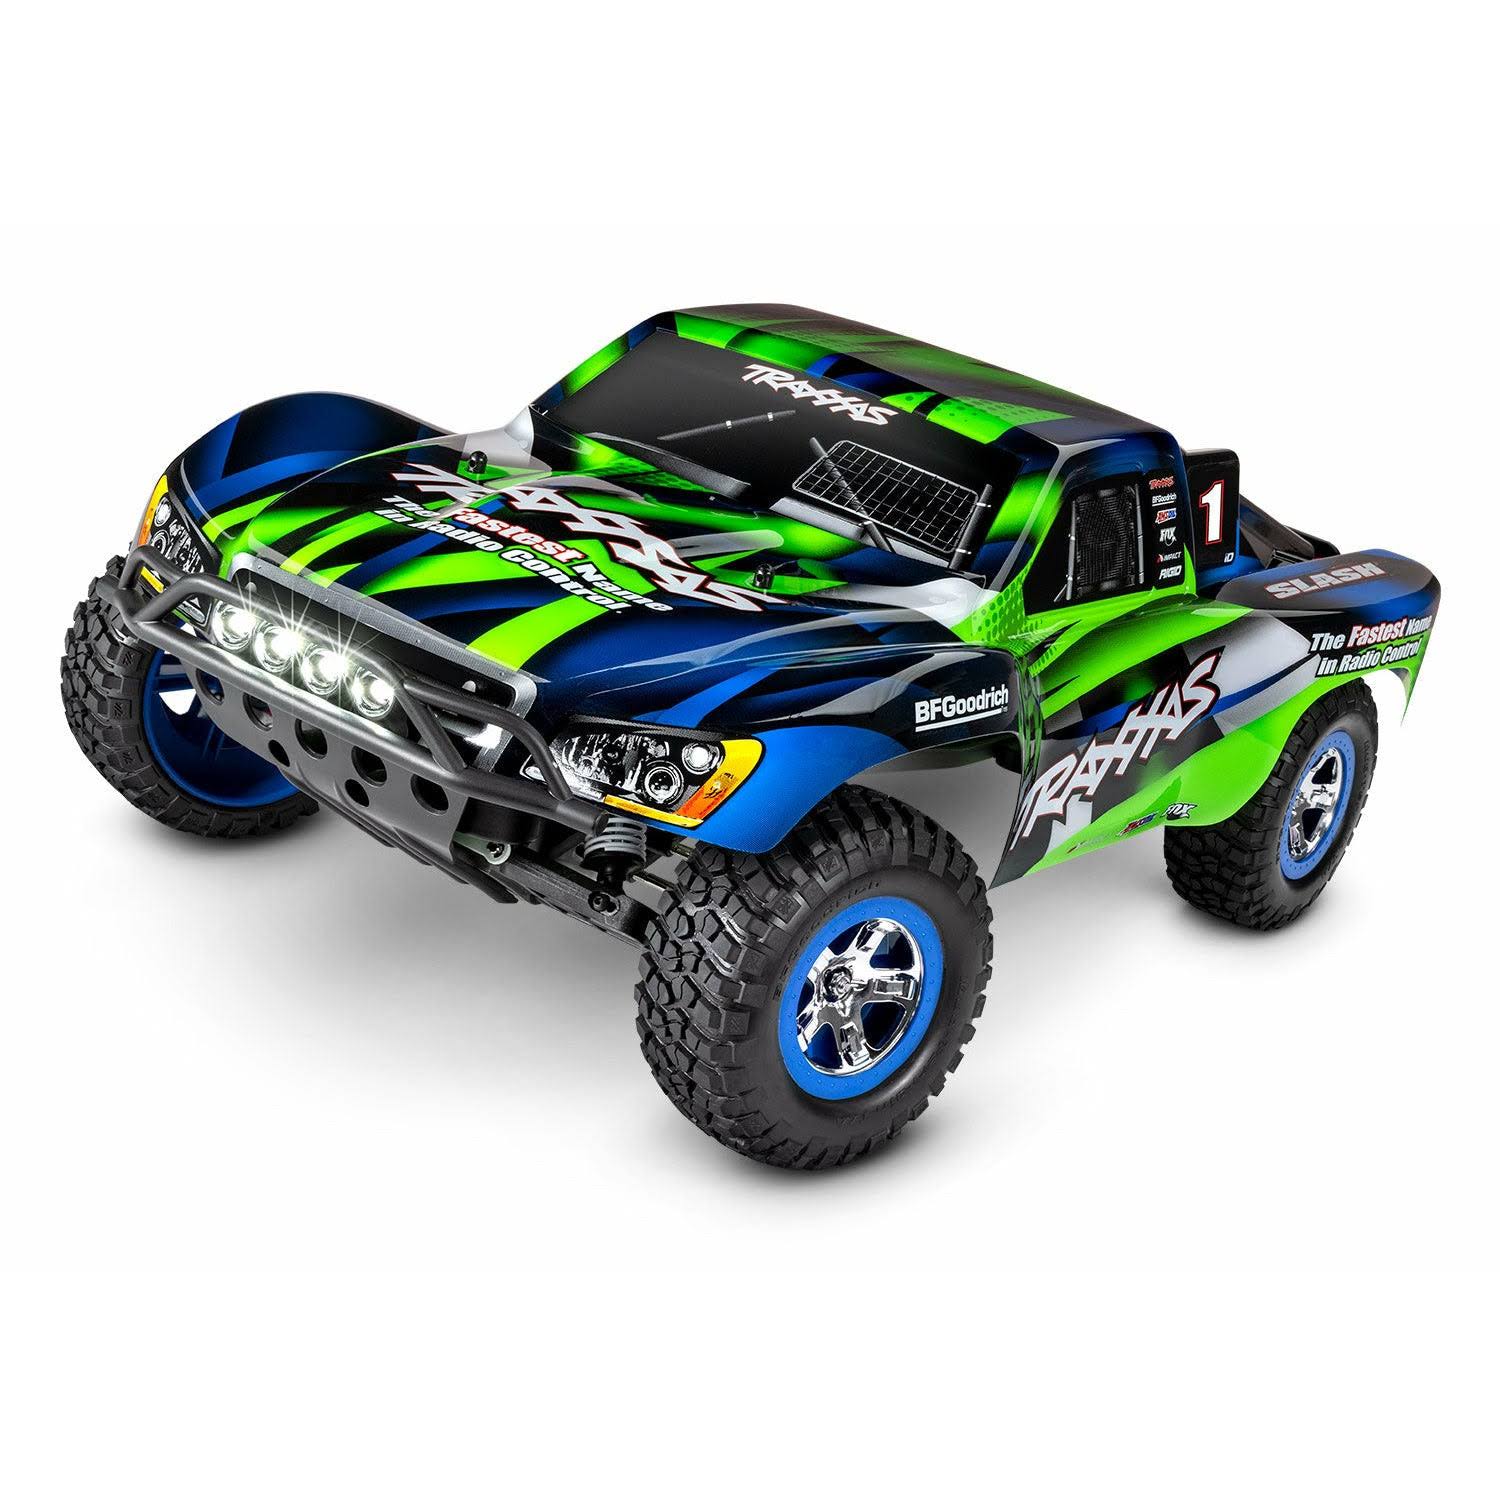 Traxxas 1/10 Slash 2WD RTR Short-Course Race Truck with Lights - Green